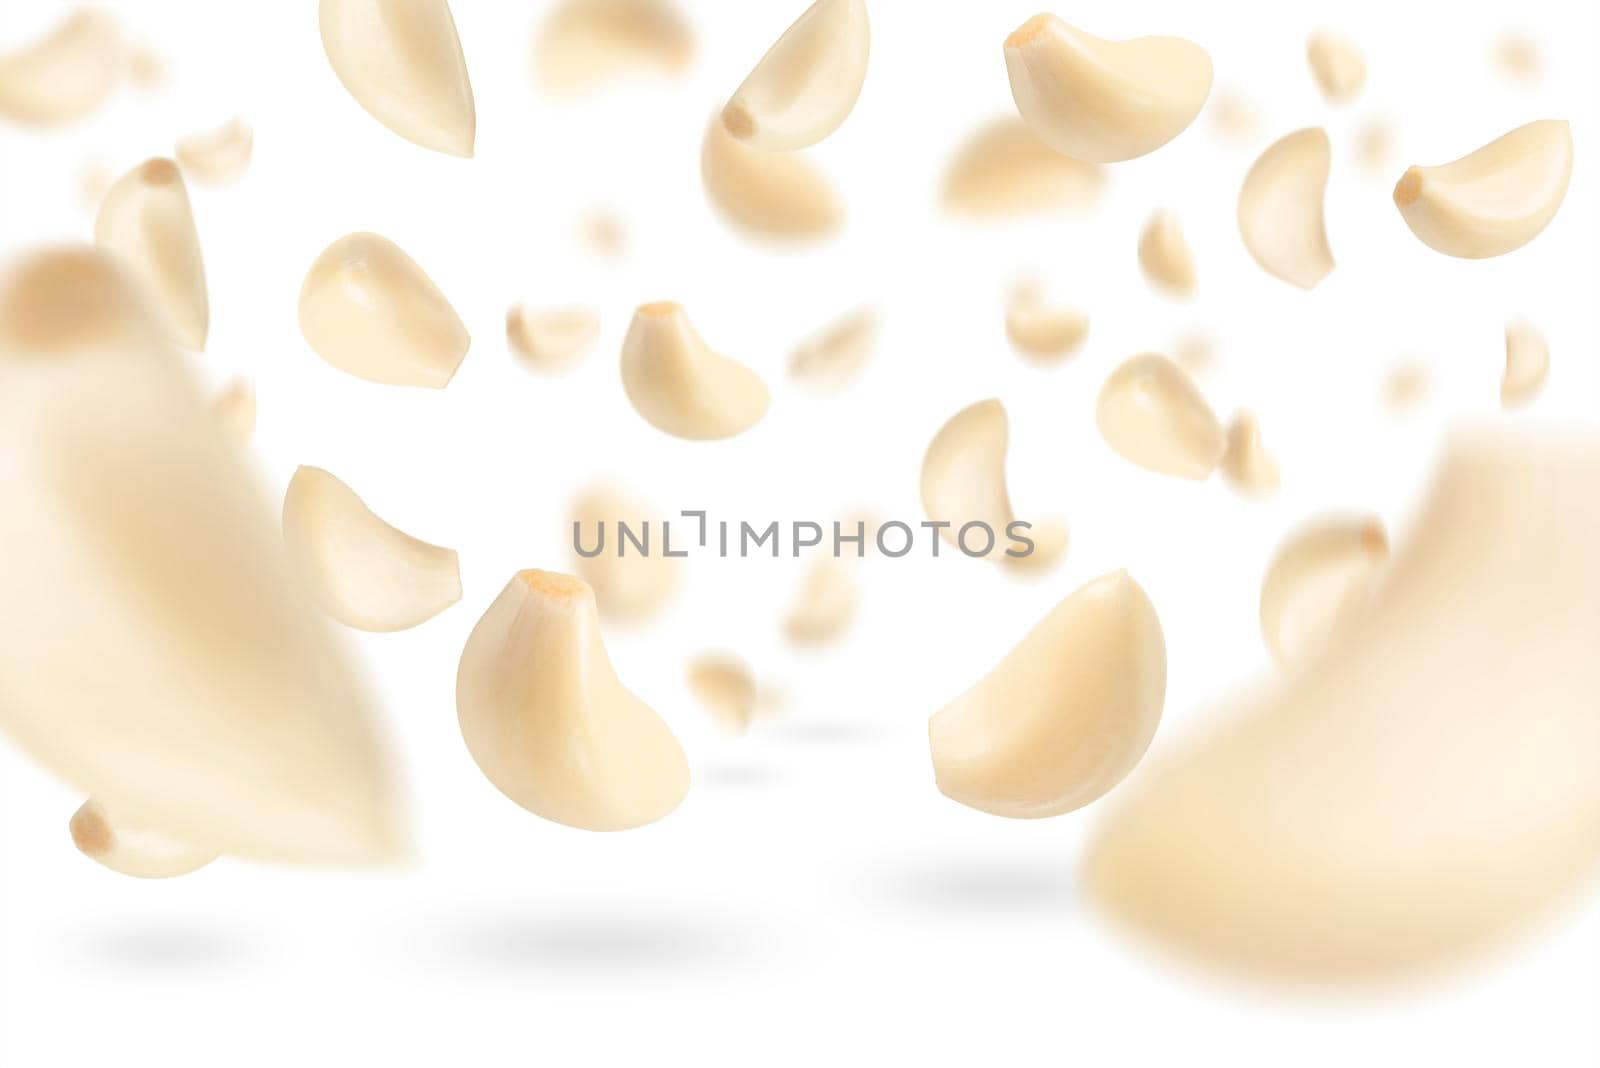 Set of peeled garlic cloves falling on a white background with selective focus. Garlic, isolated on a white background, flies down, casting a shadow